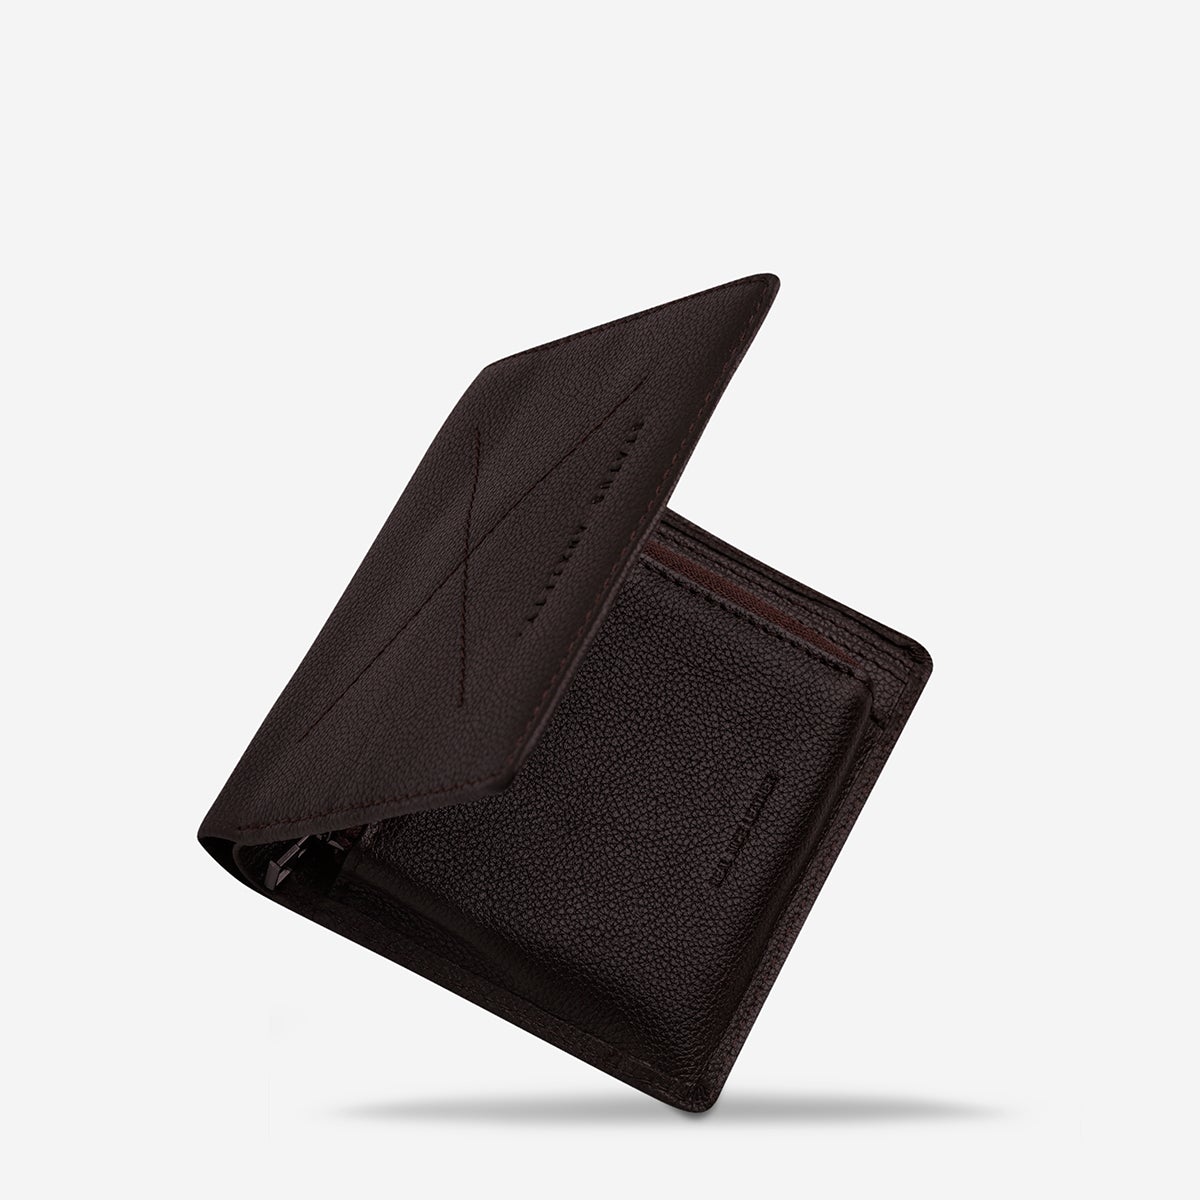 STATUS ANXIETY CLIFFORD MENS WALLET CHOCOLATE